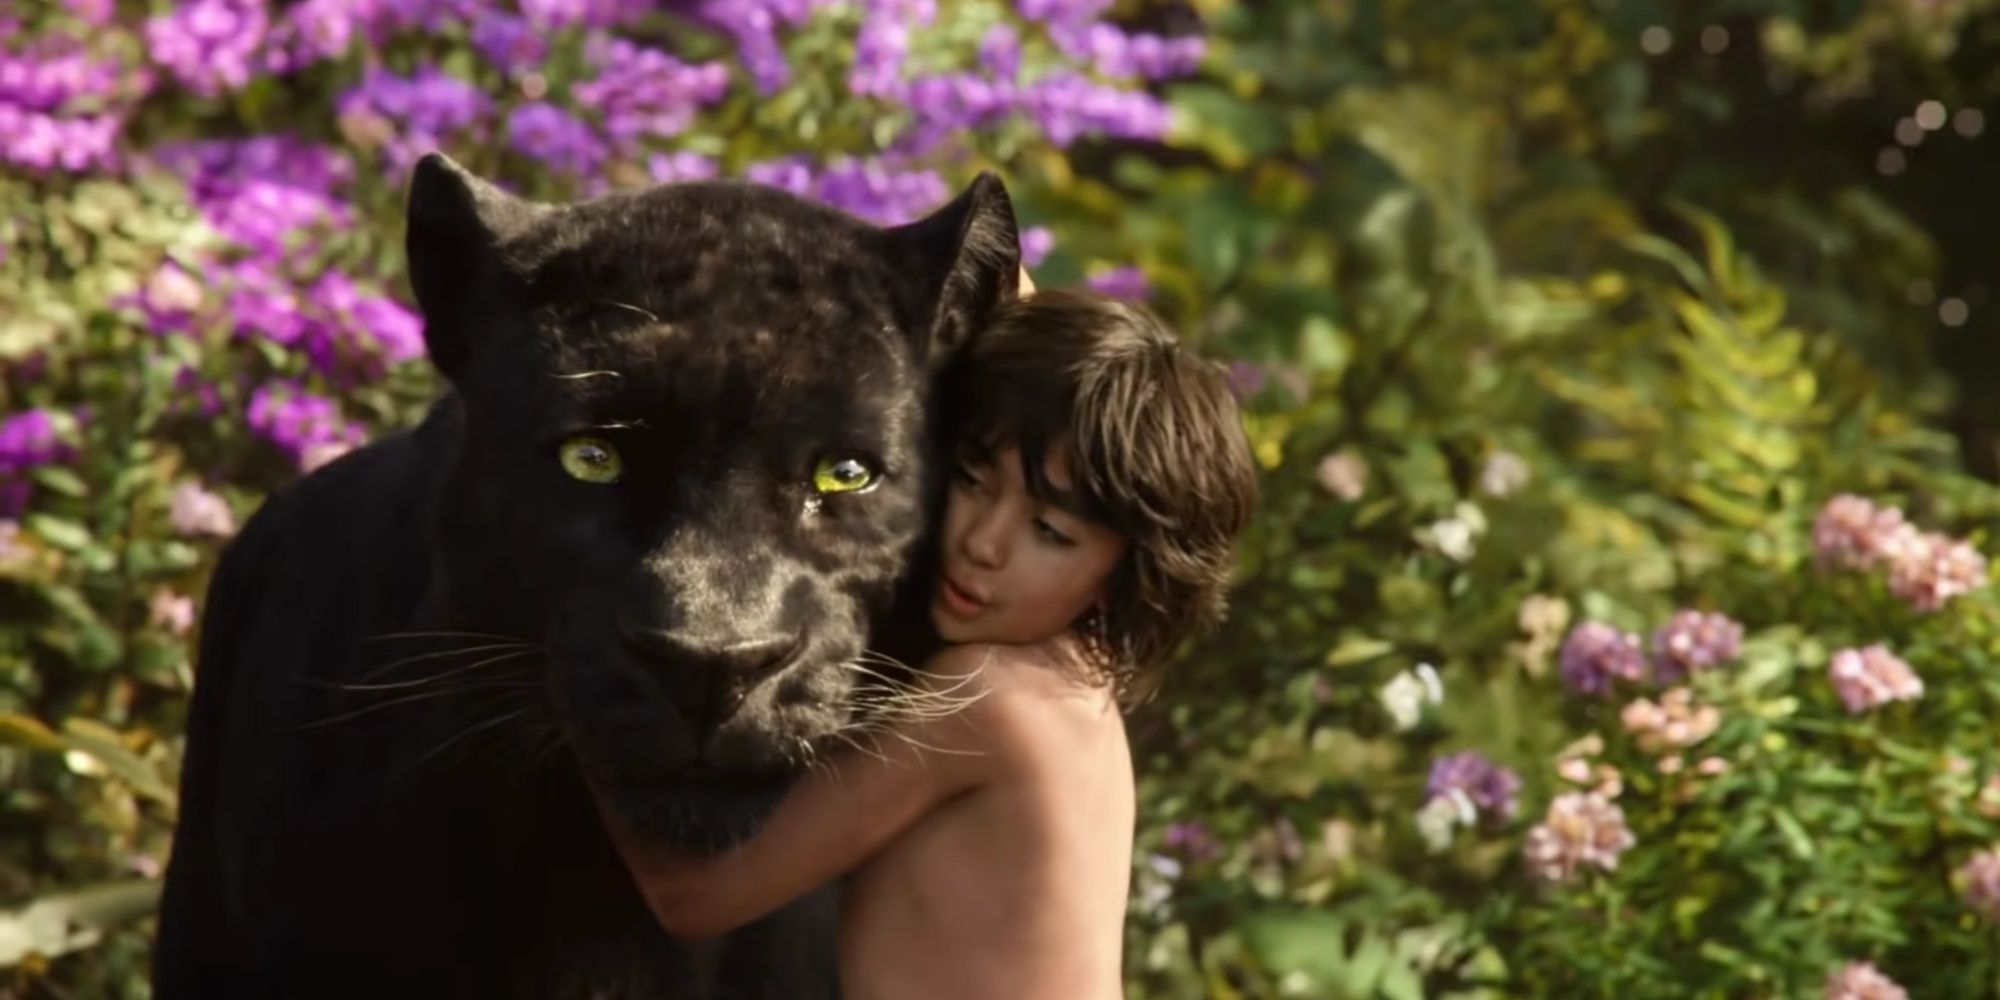 Mowgli holding Bagheera during 'The Bare Necessities' musical number from The Jungle Book in 2016. 